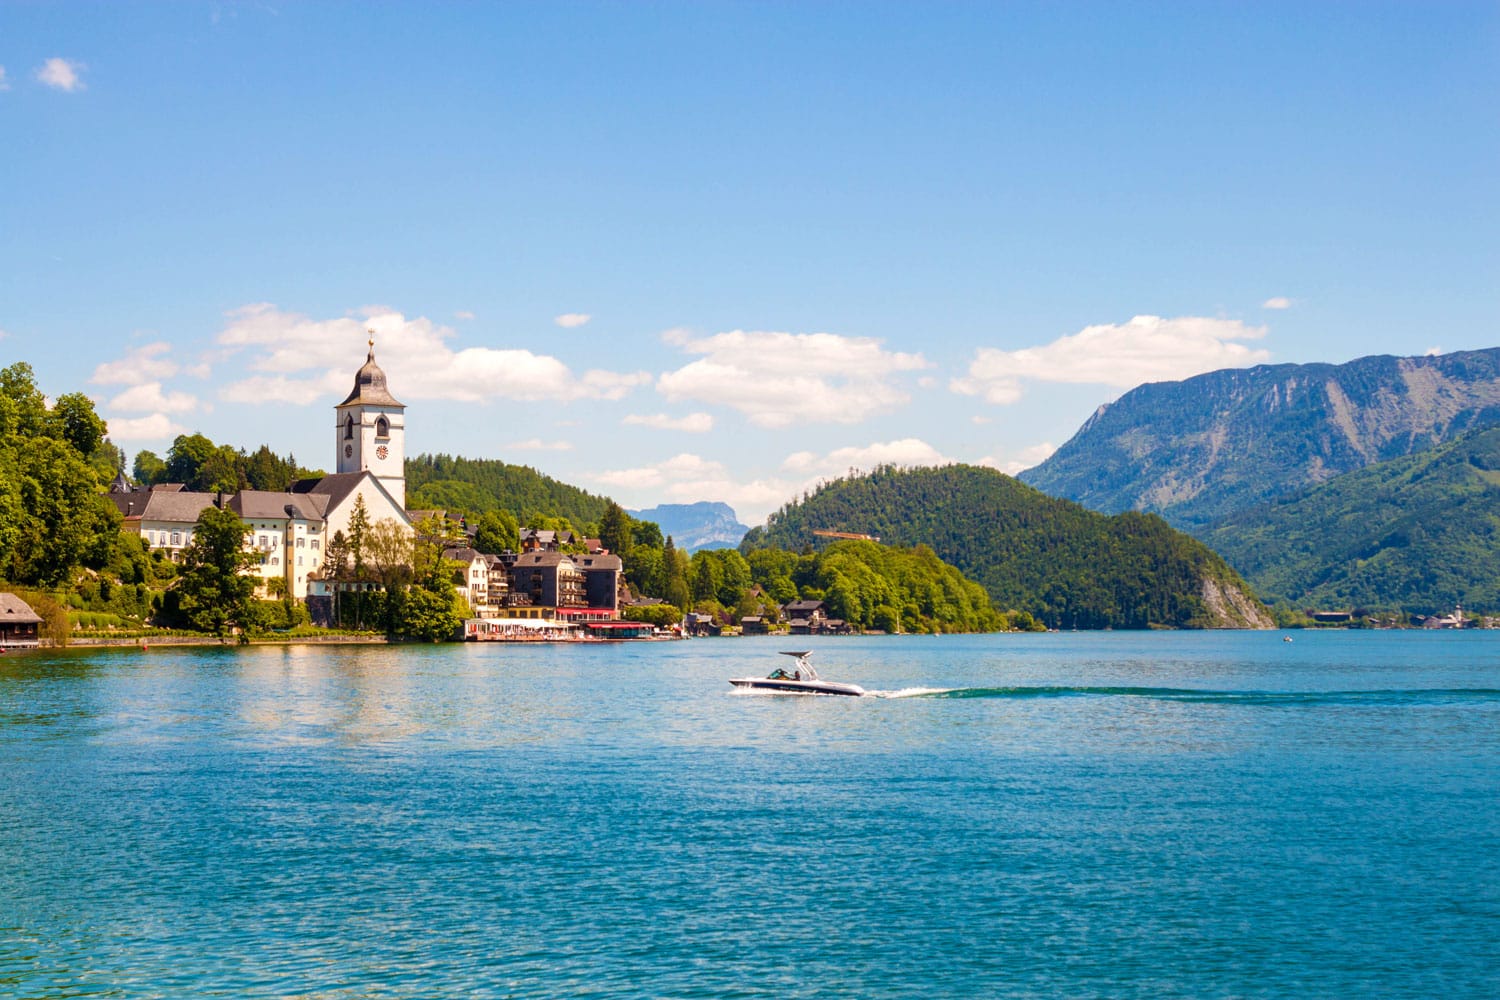 View of St. Wolfgang chapel and the village of St. Wolfgang at Wolfgangsee lake, Austria